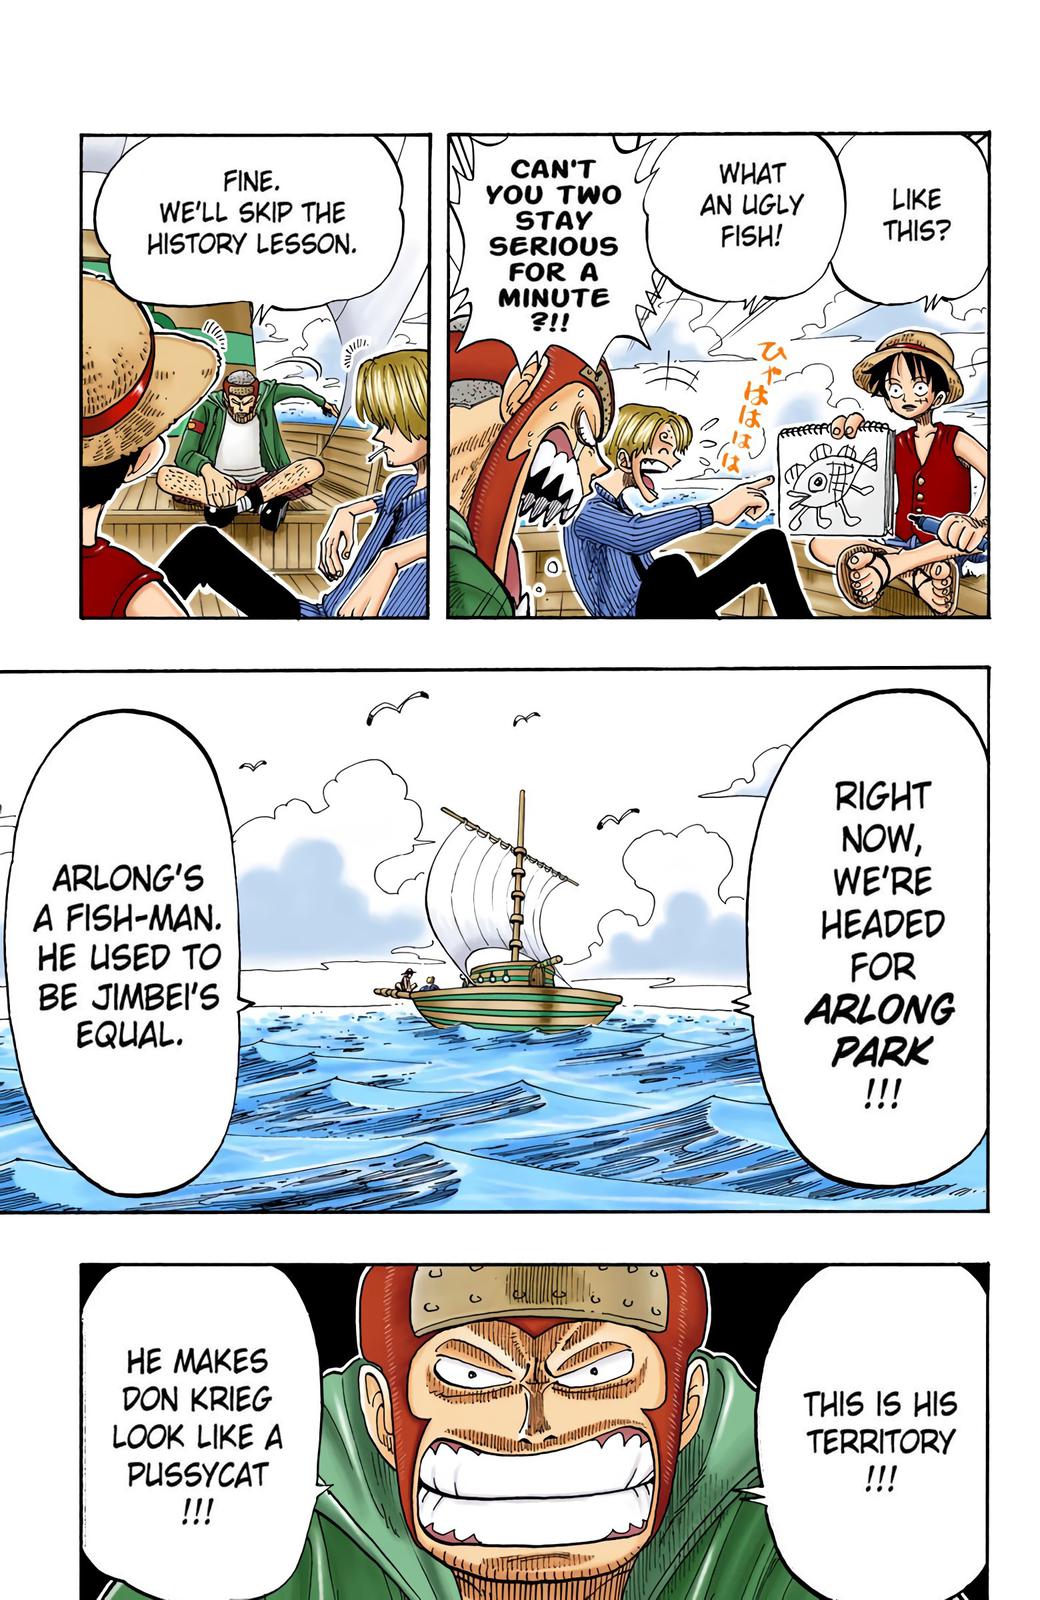 COLORING MANGA PAGE #5 - LUFFY DEFEATS DON KRIEG (ONE PIECE)